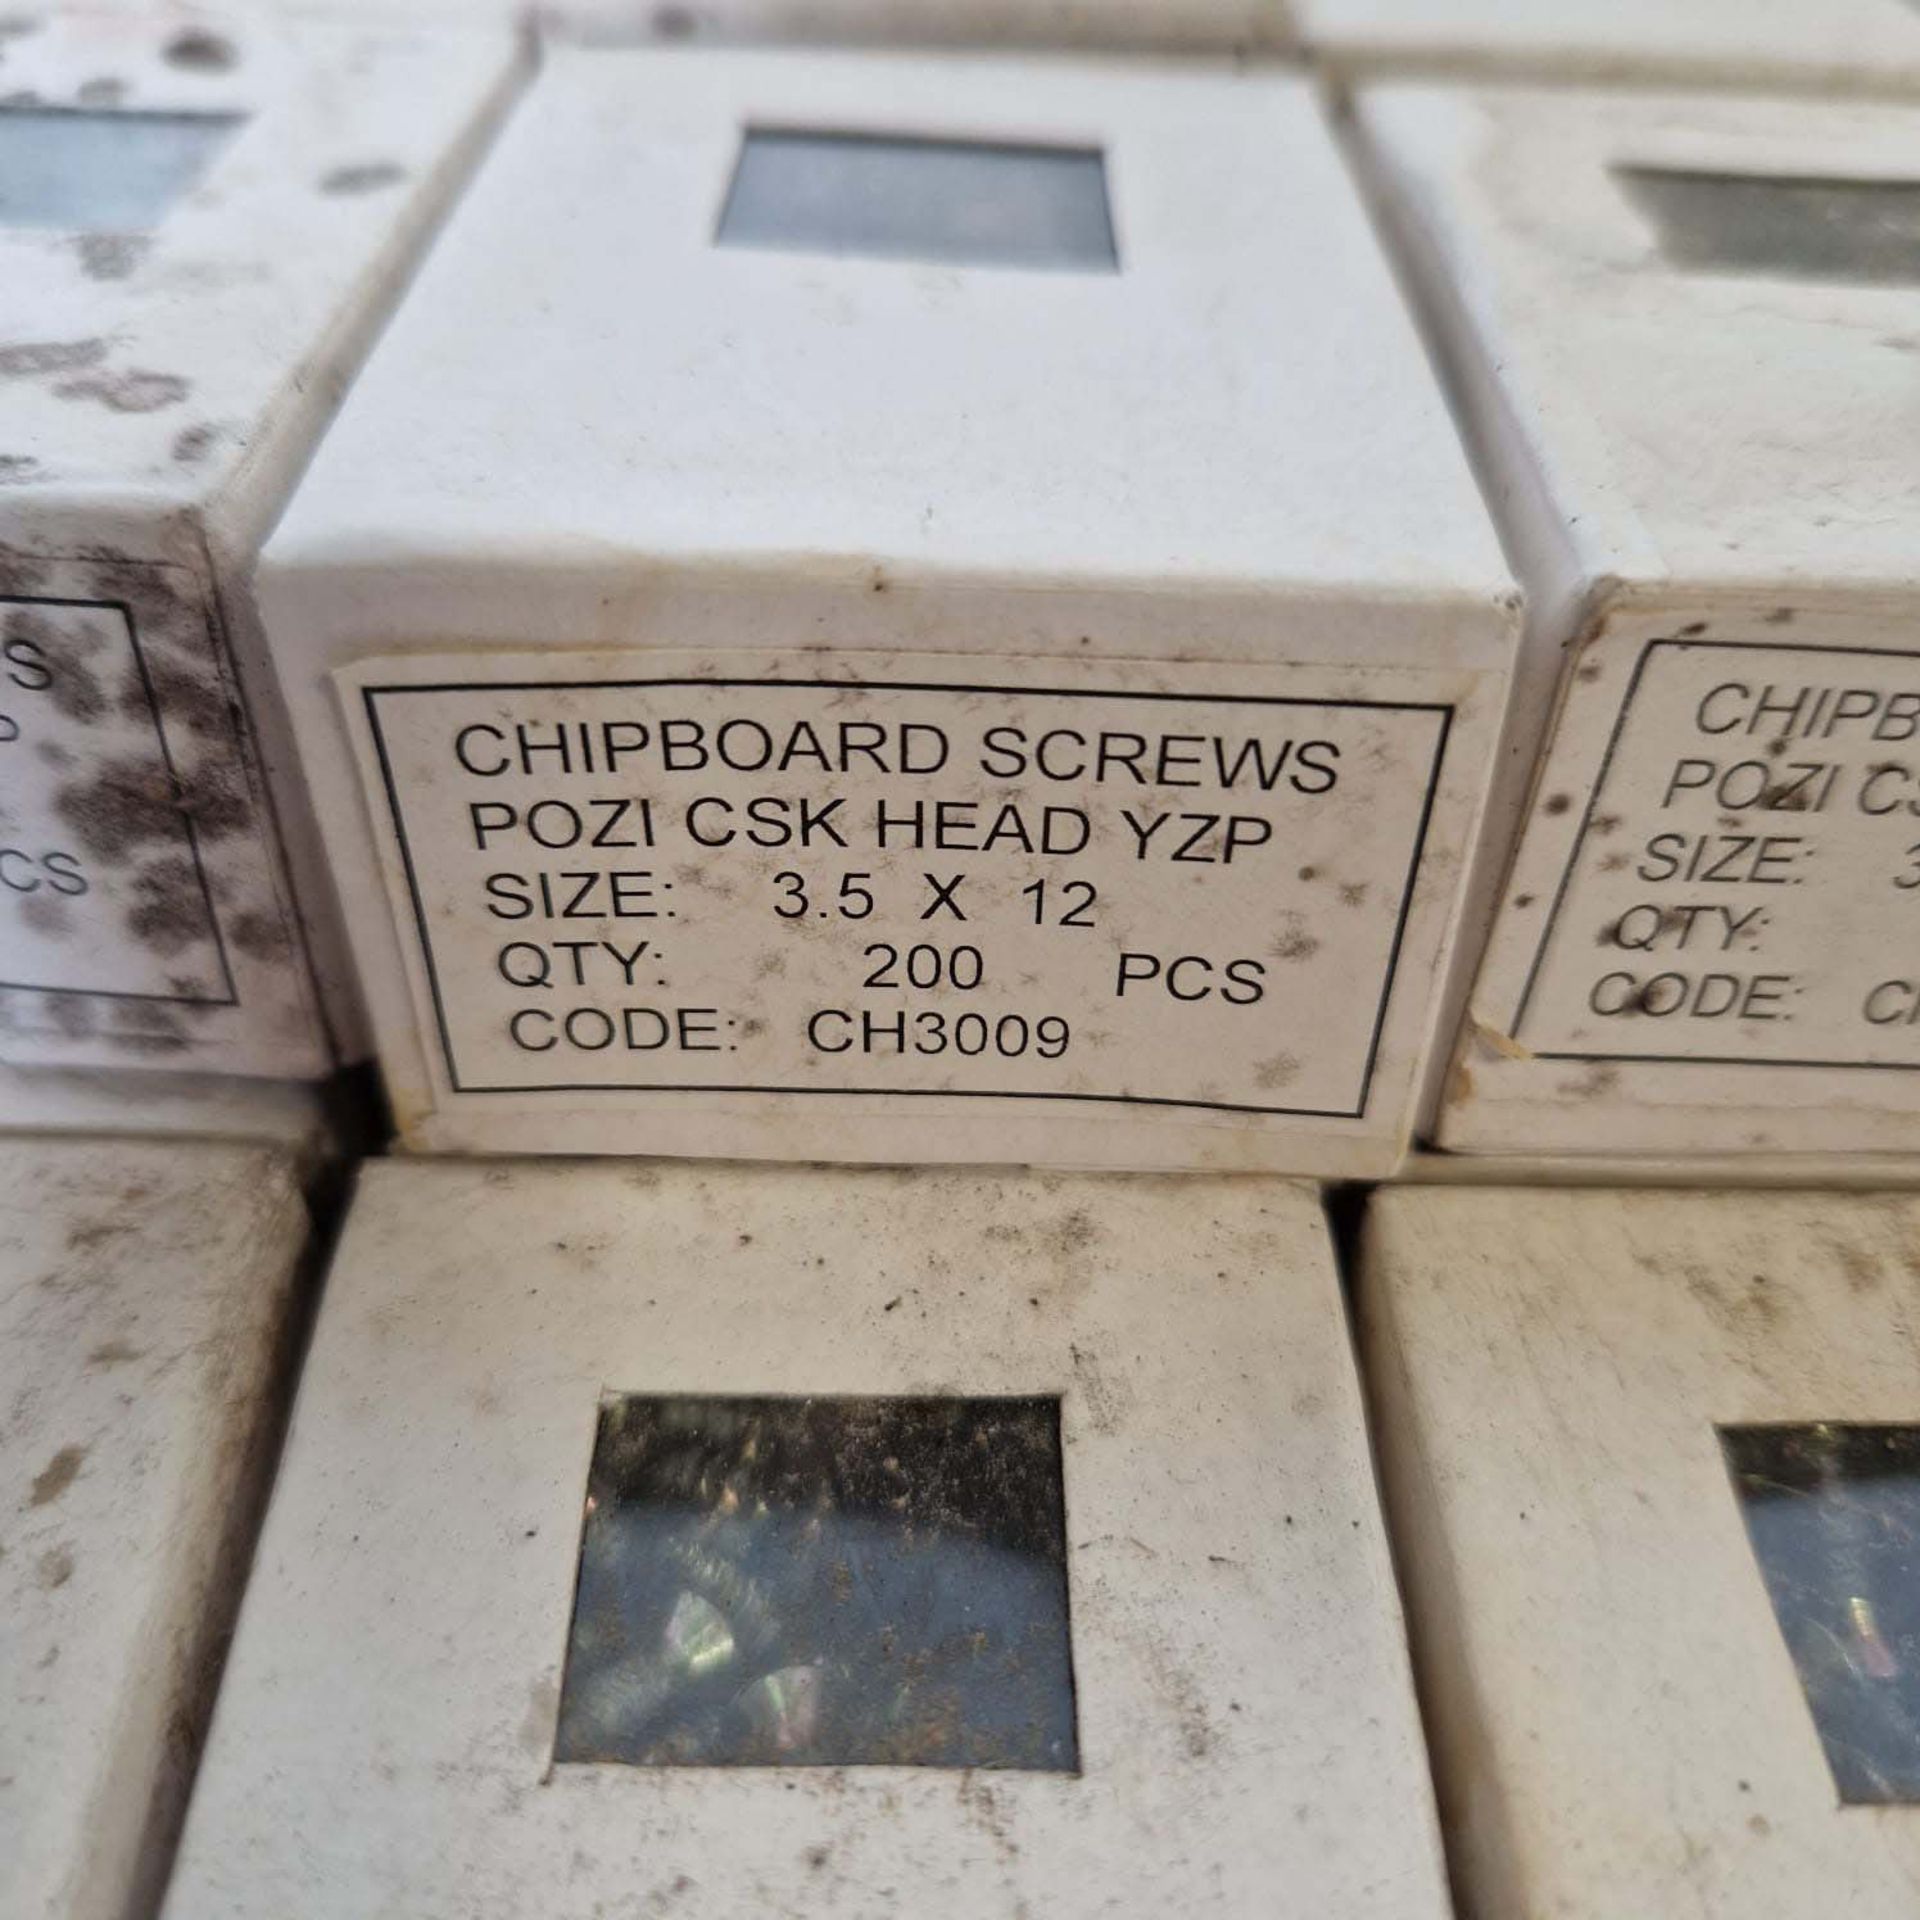 Large Quantity of Chipboard Pozi CSK Head Screws. - Image 2 of 3